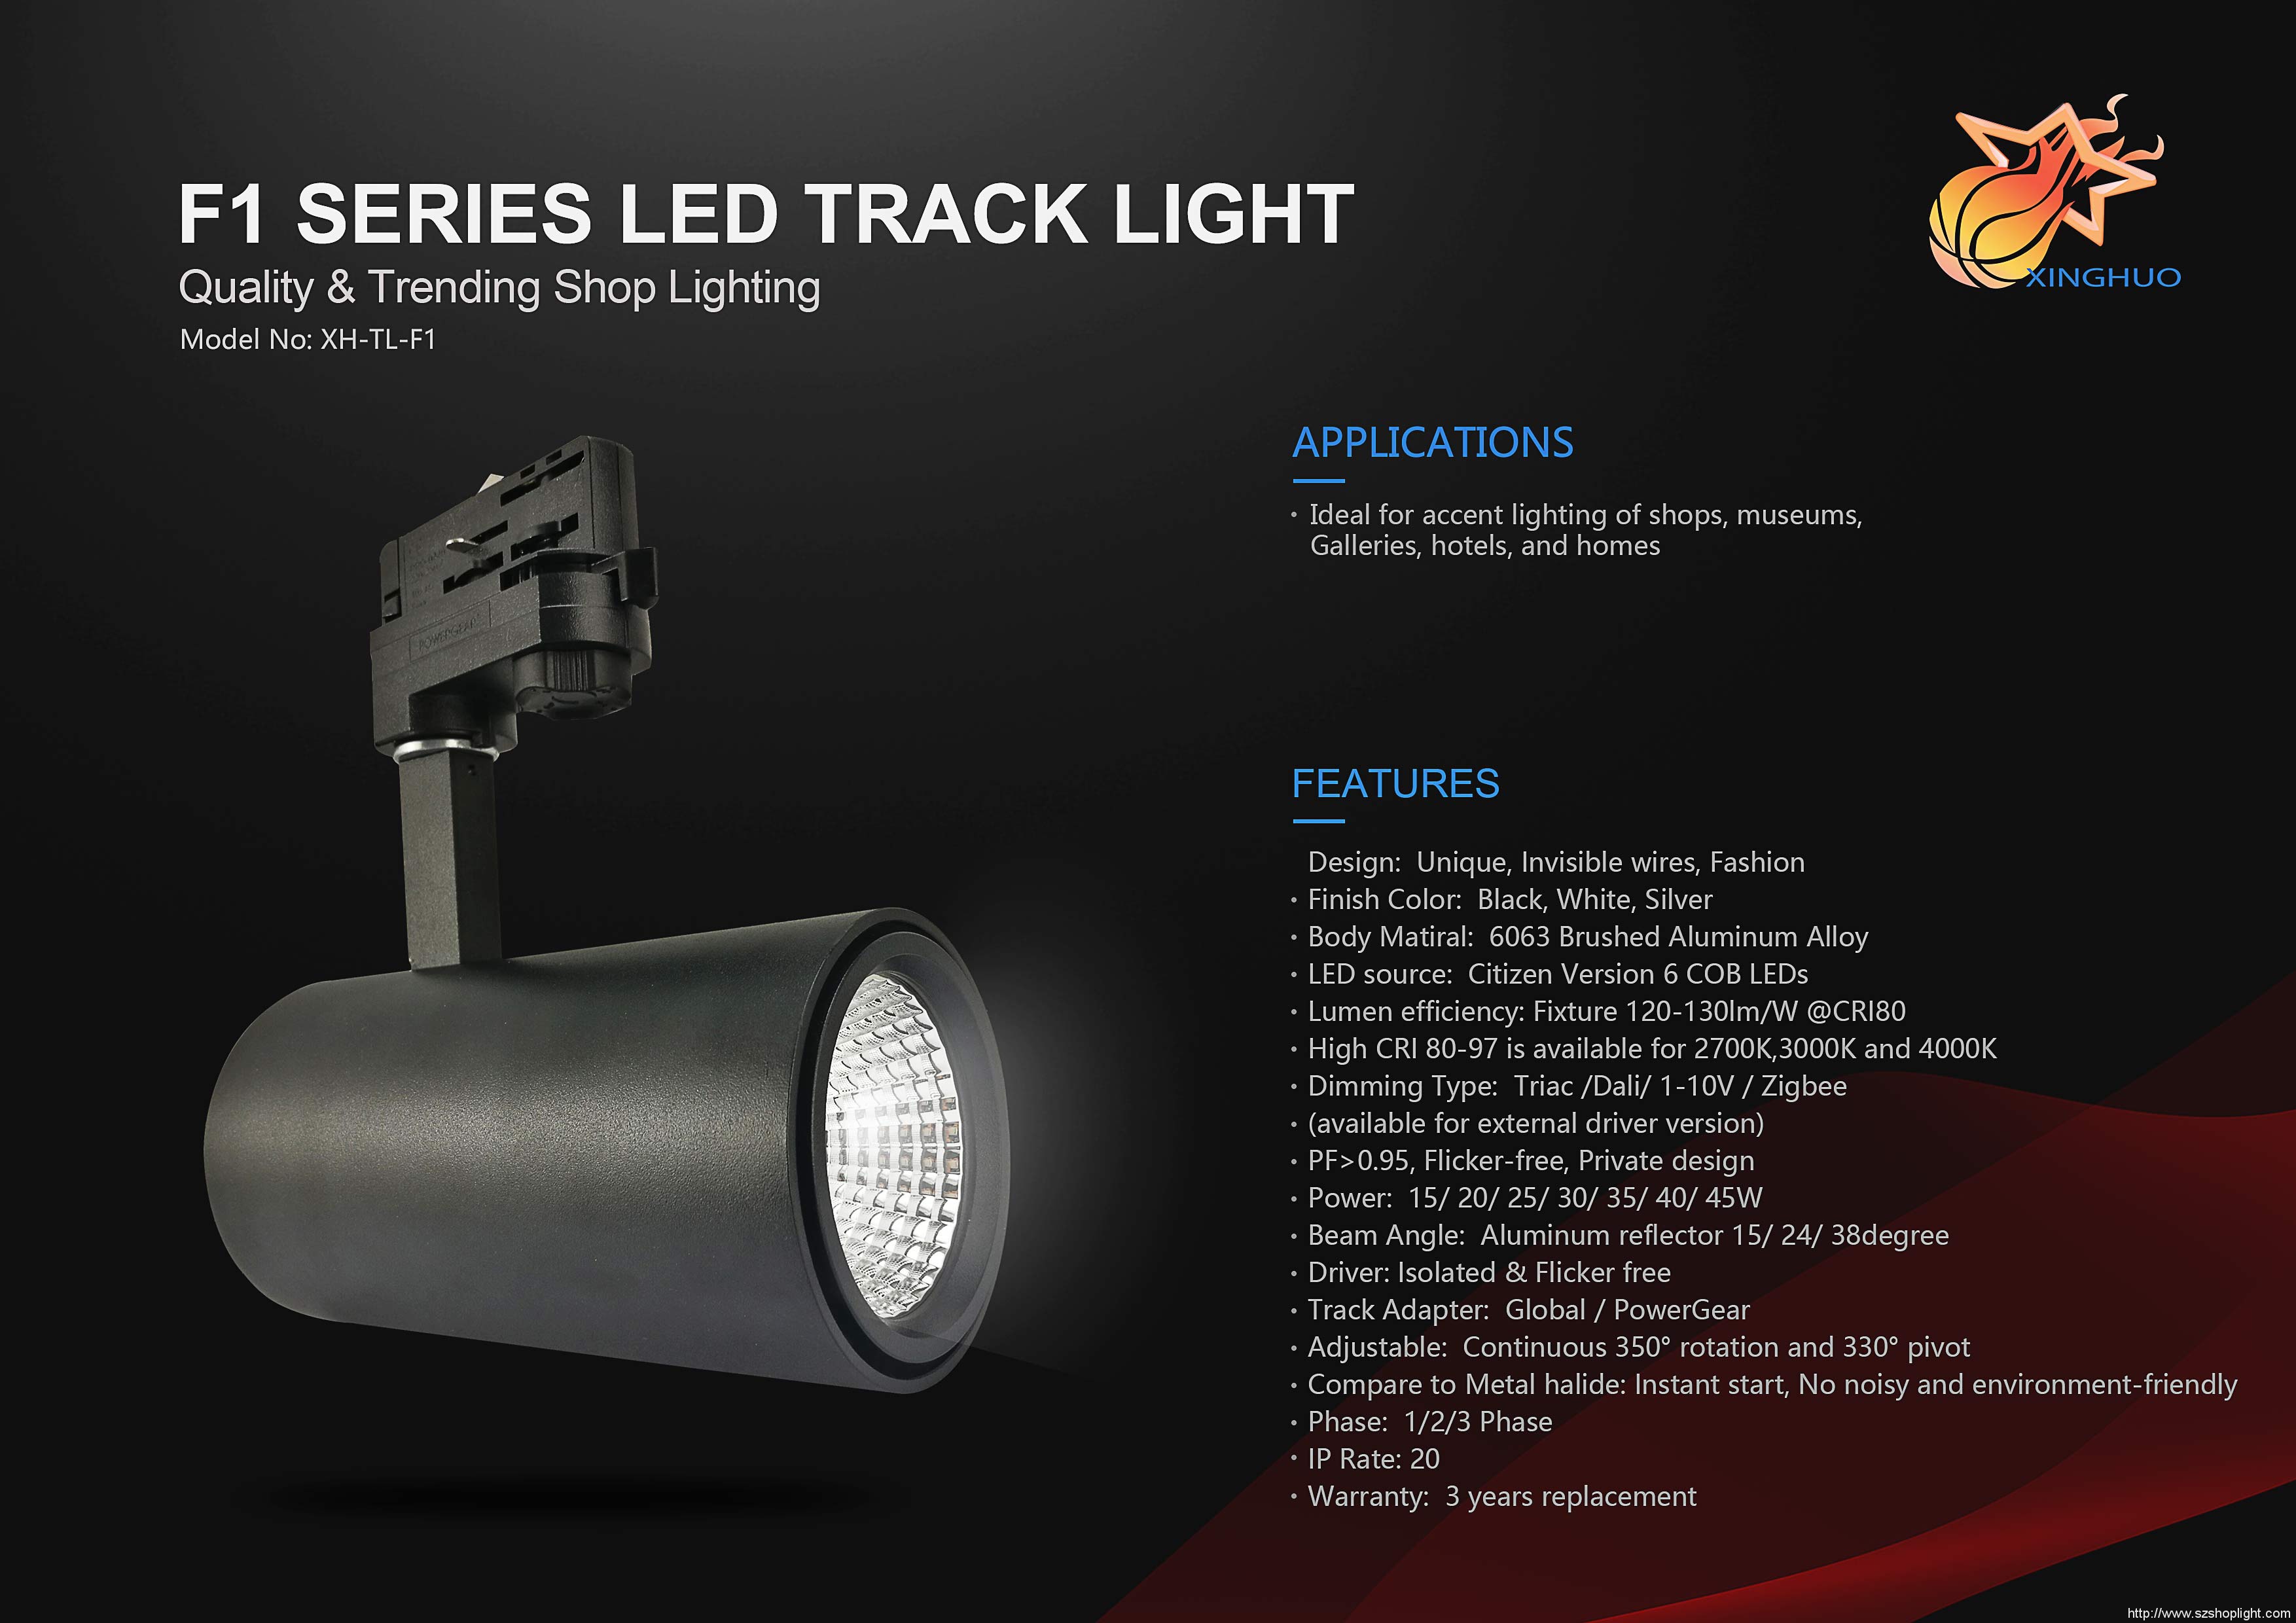 LED track light UGR less than 19 come to markets now